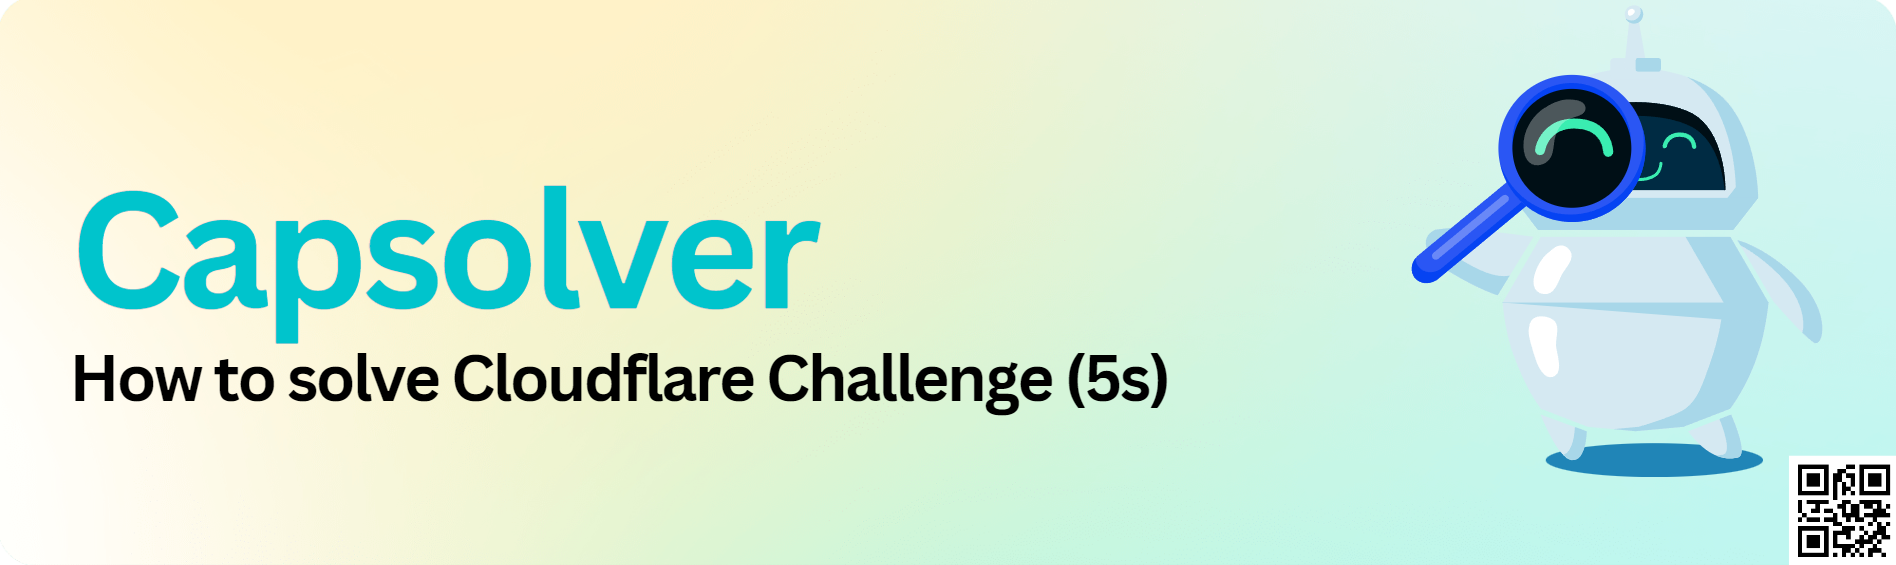 How to solve Cloudflare Challenge